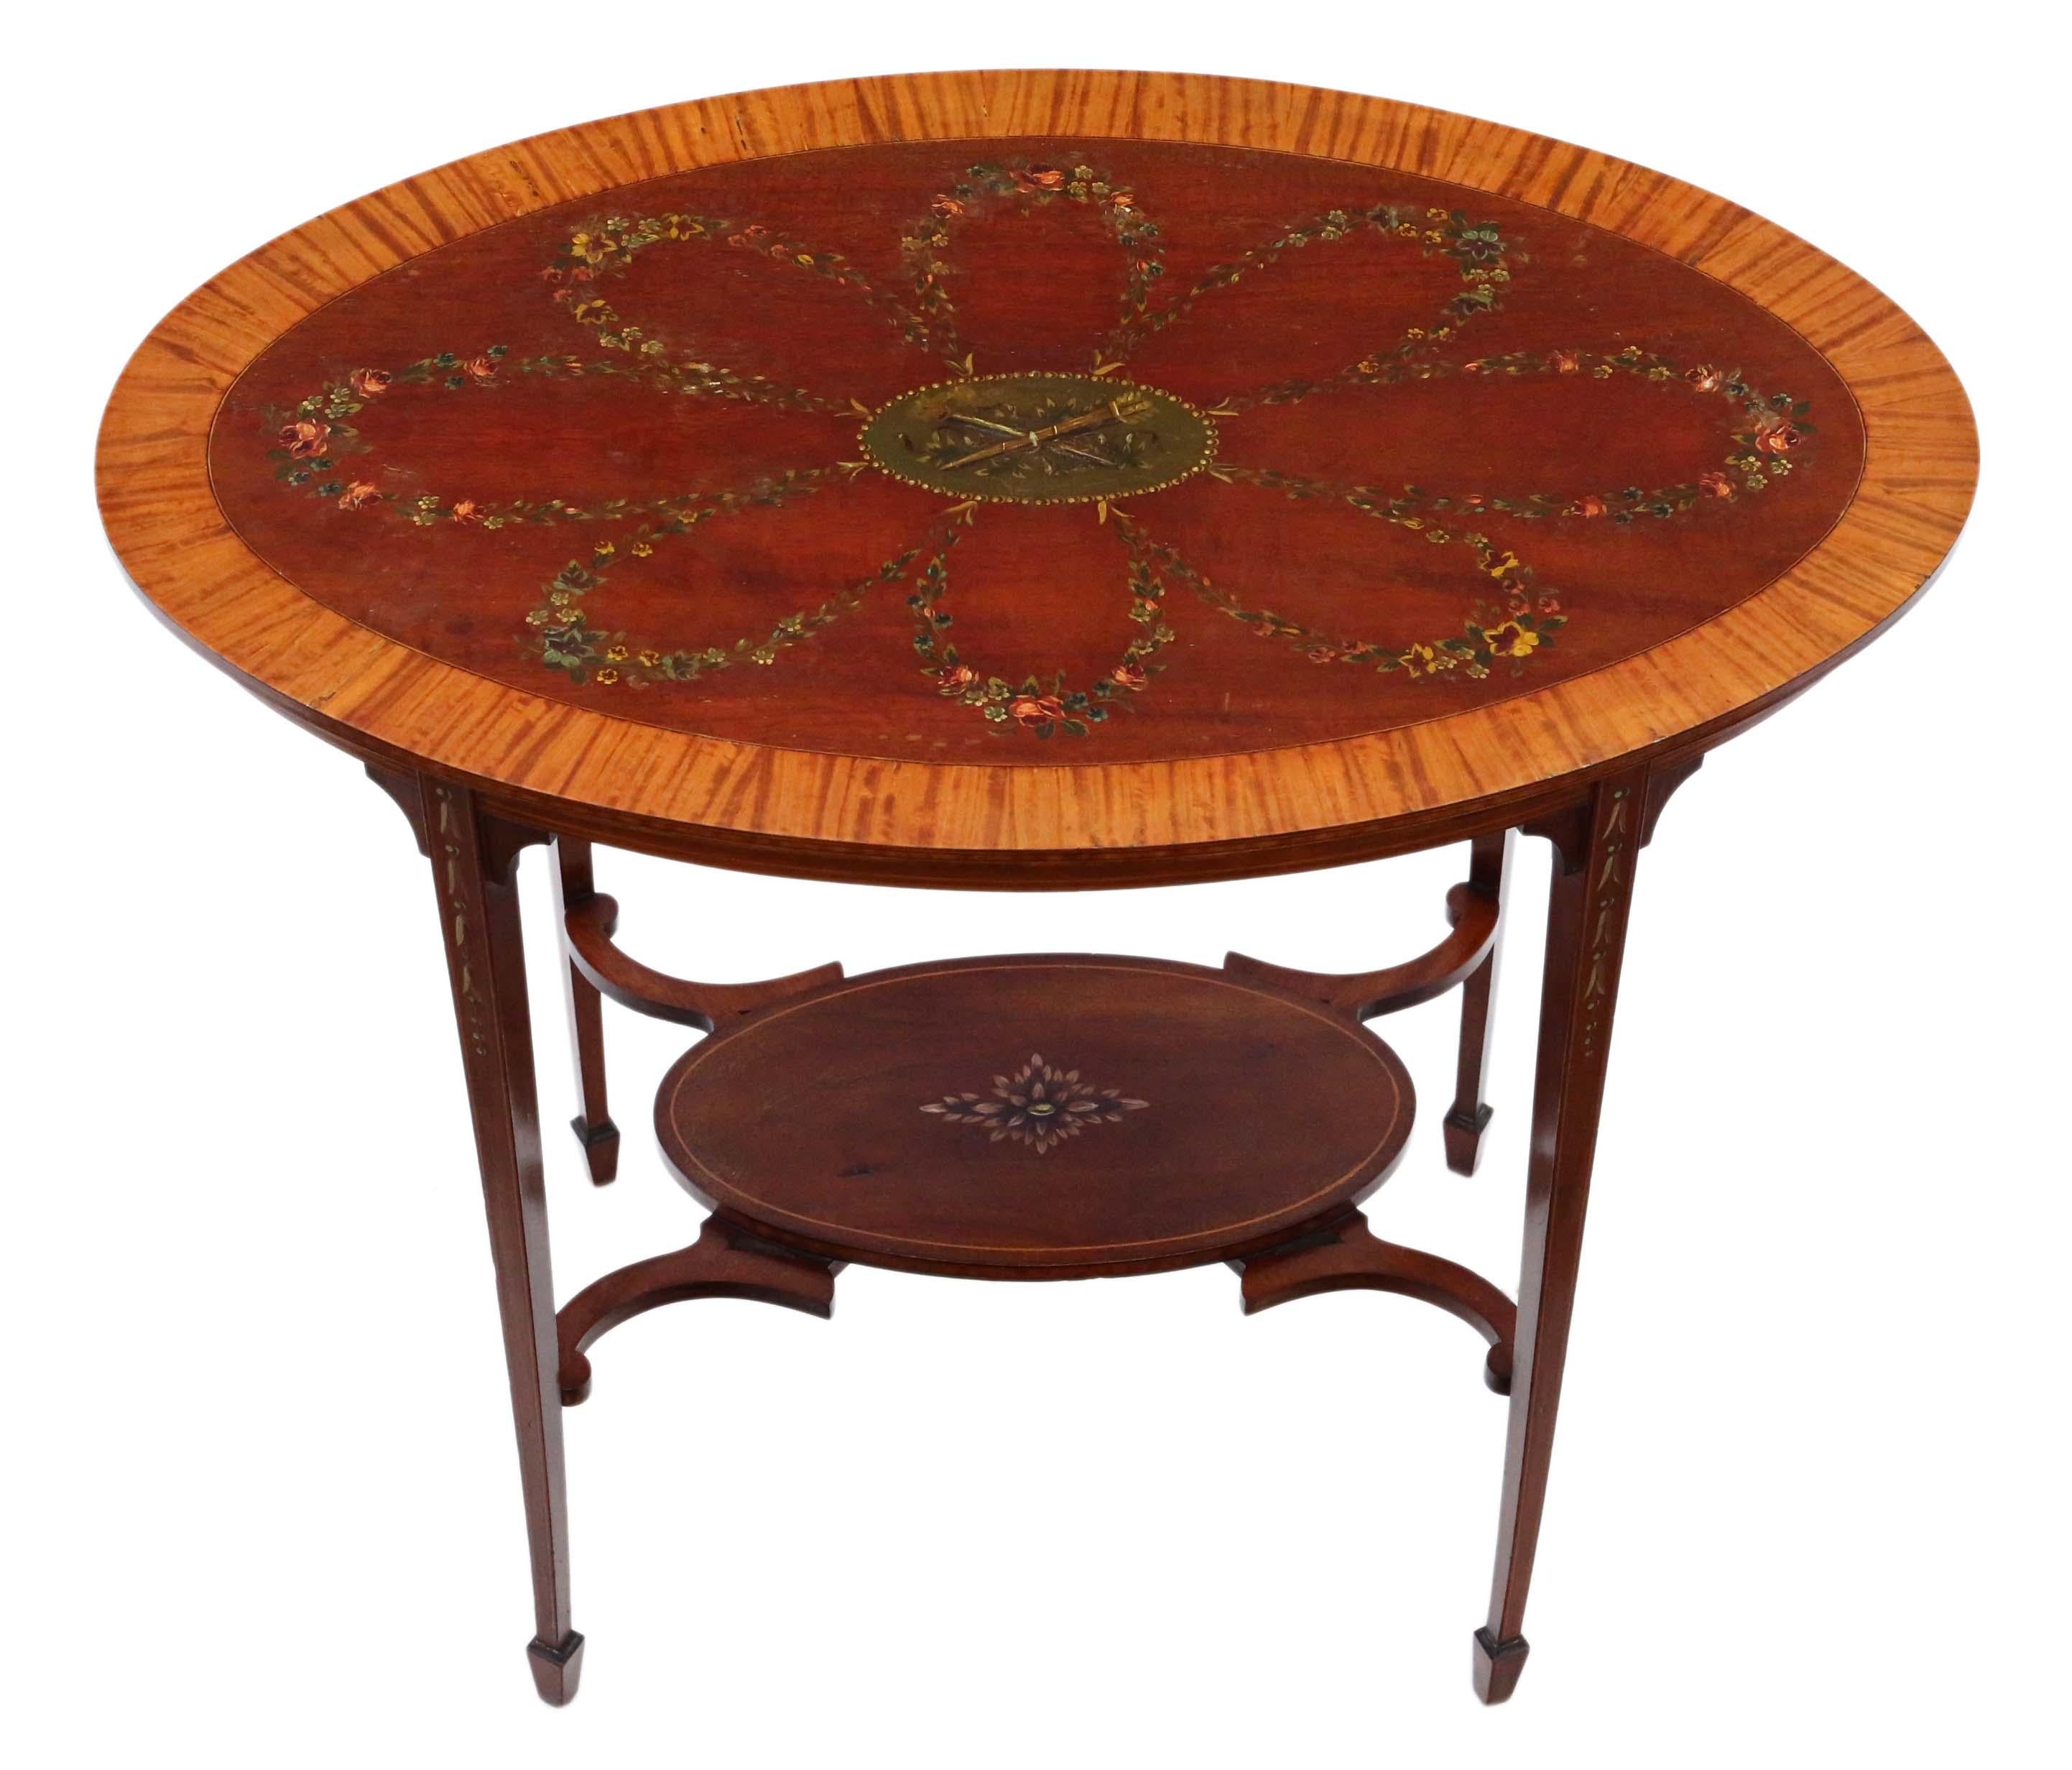 Antique 19th Century Decorated Satinwood and Mahogany Table Occasional In Good Condition For Sale In Wisbech, Cambridgeshire